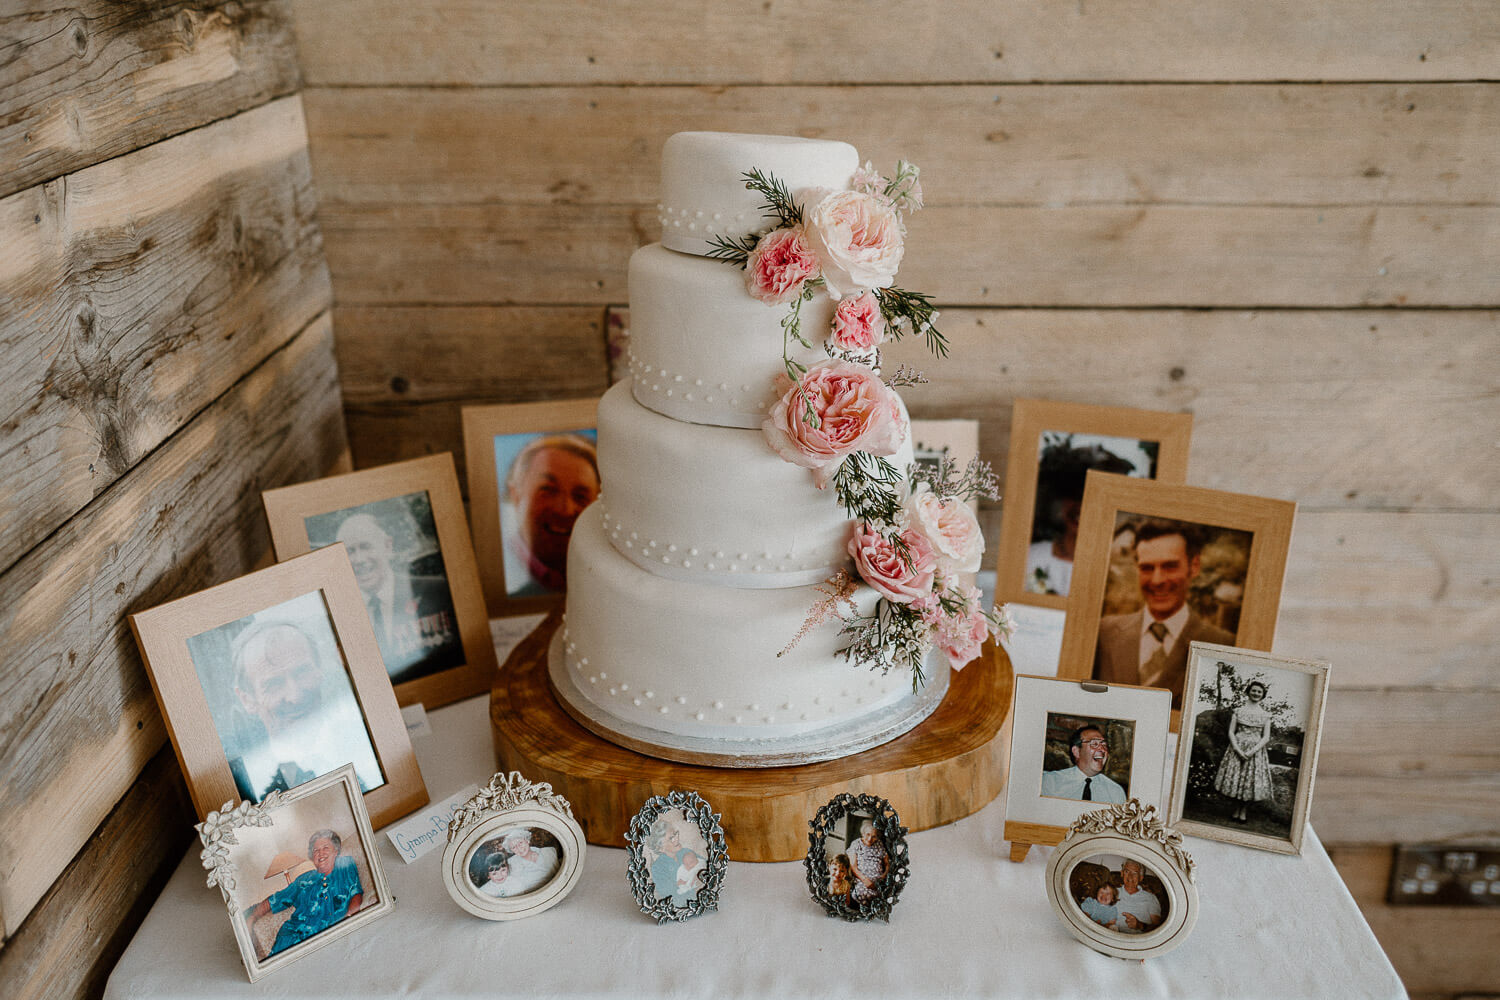 White tiered wedding cake decorated with pink flowers and surrounded with photos of loved ones departed.